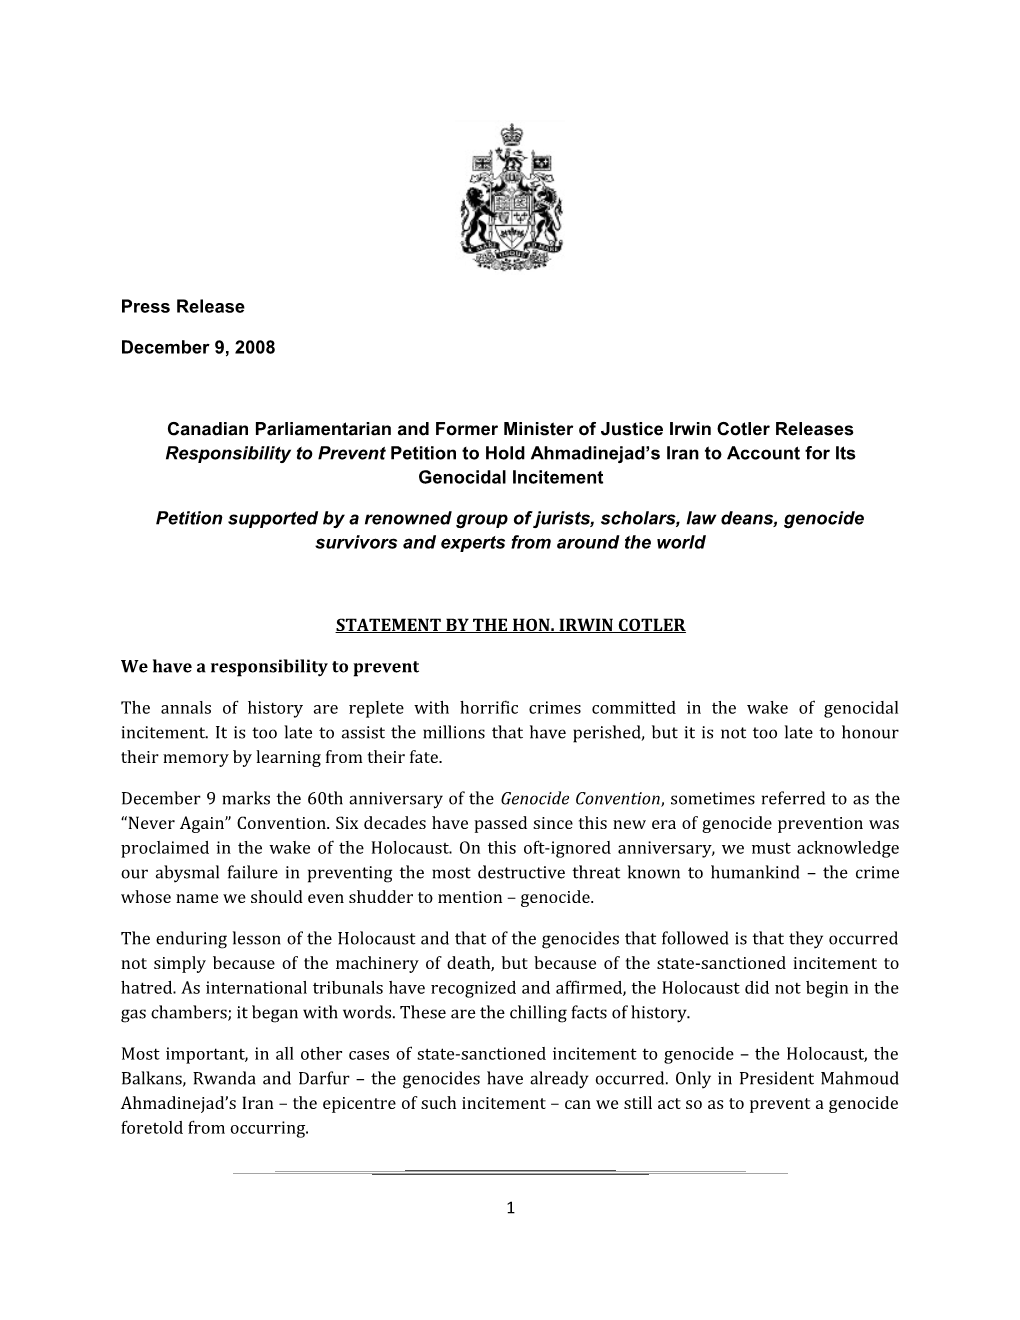 Statement by the Hon. Irwin Cotler